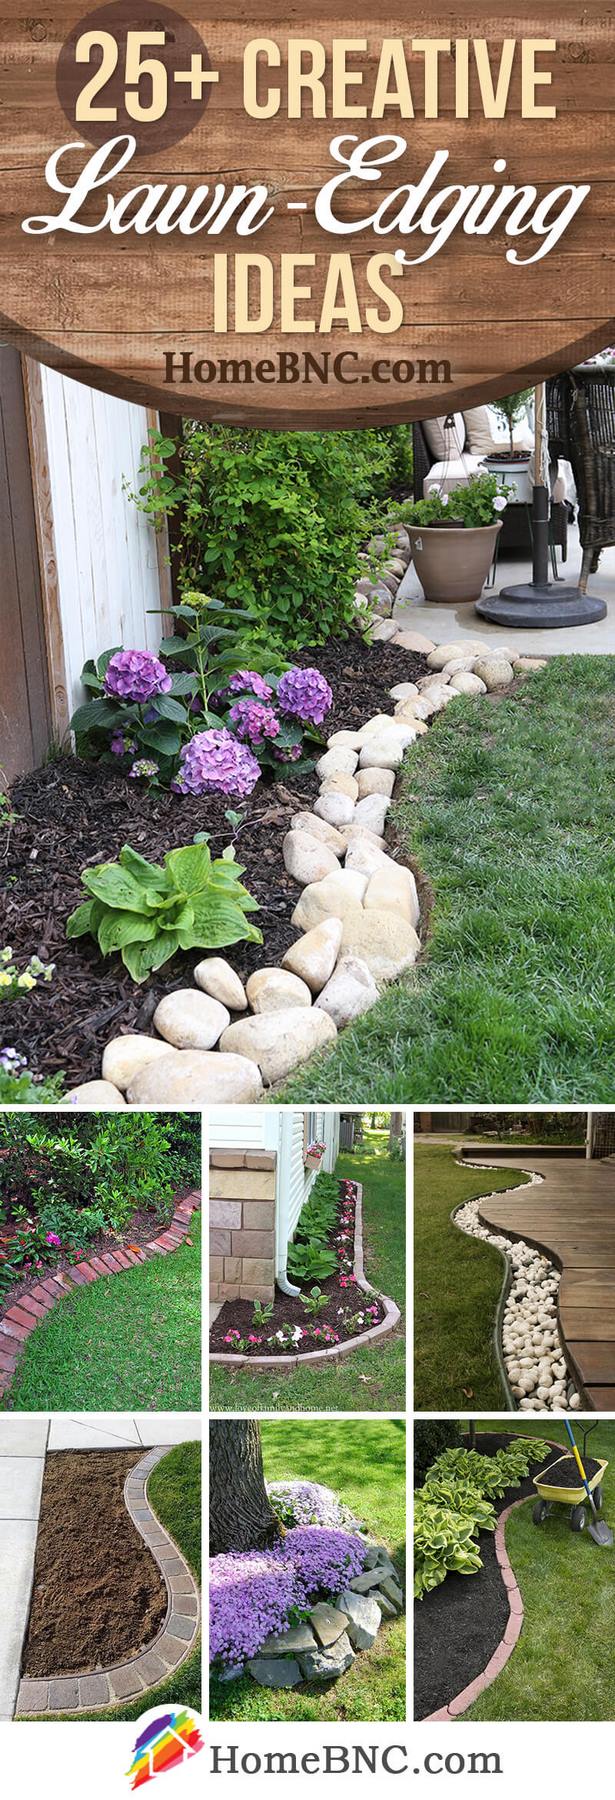 edging-ideas-for-the-garden-06_3 Кант идеи за градината